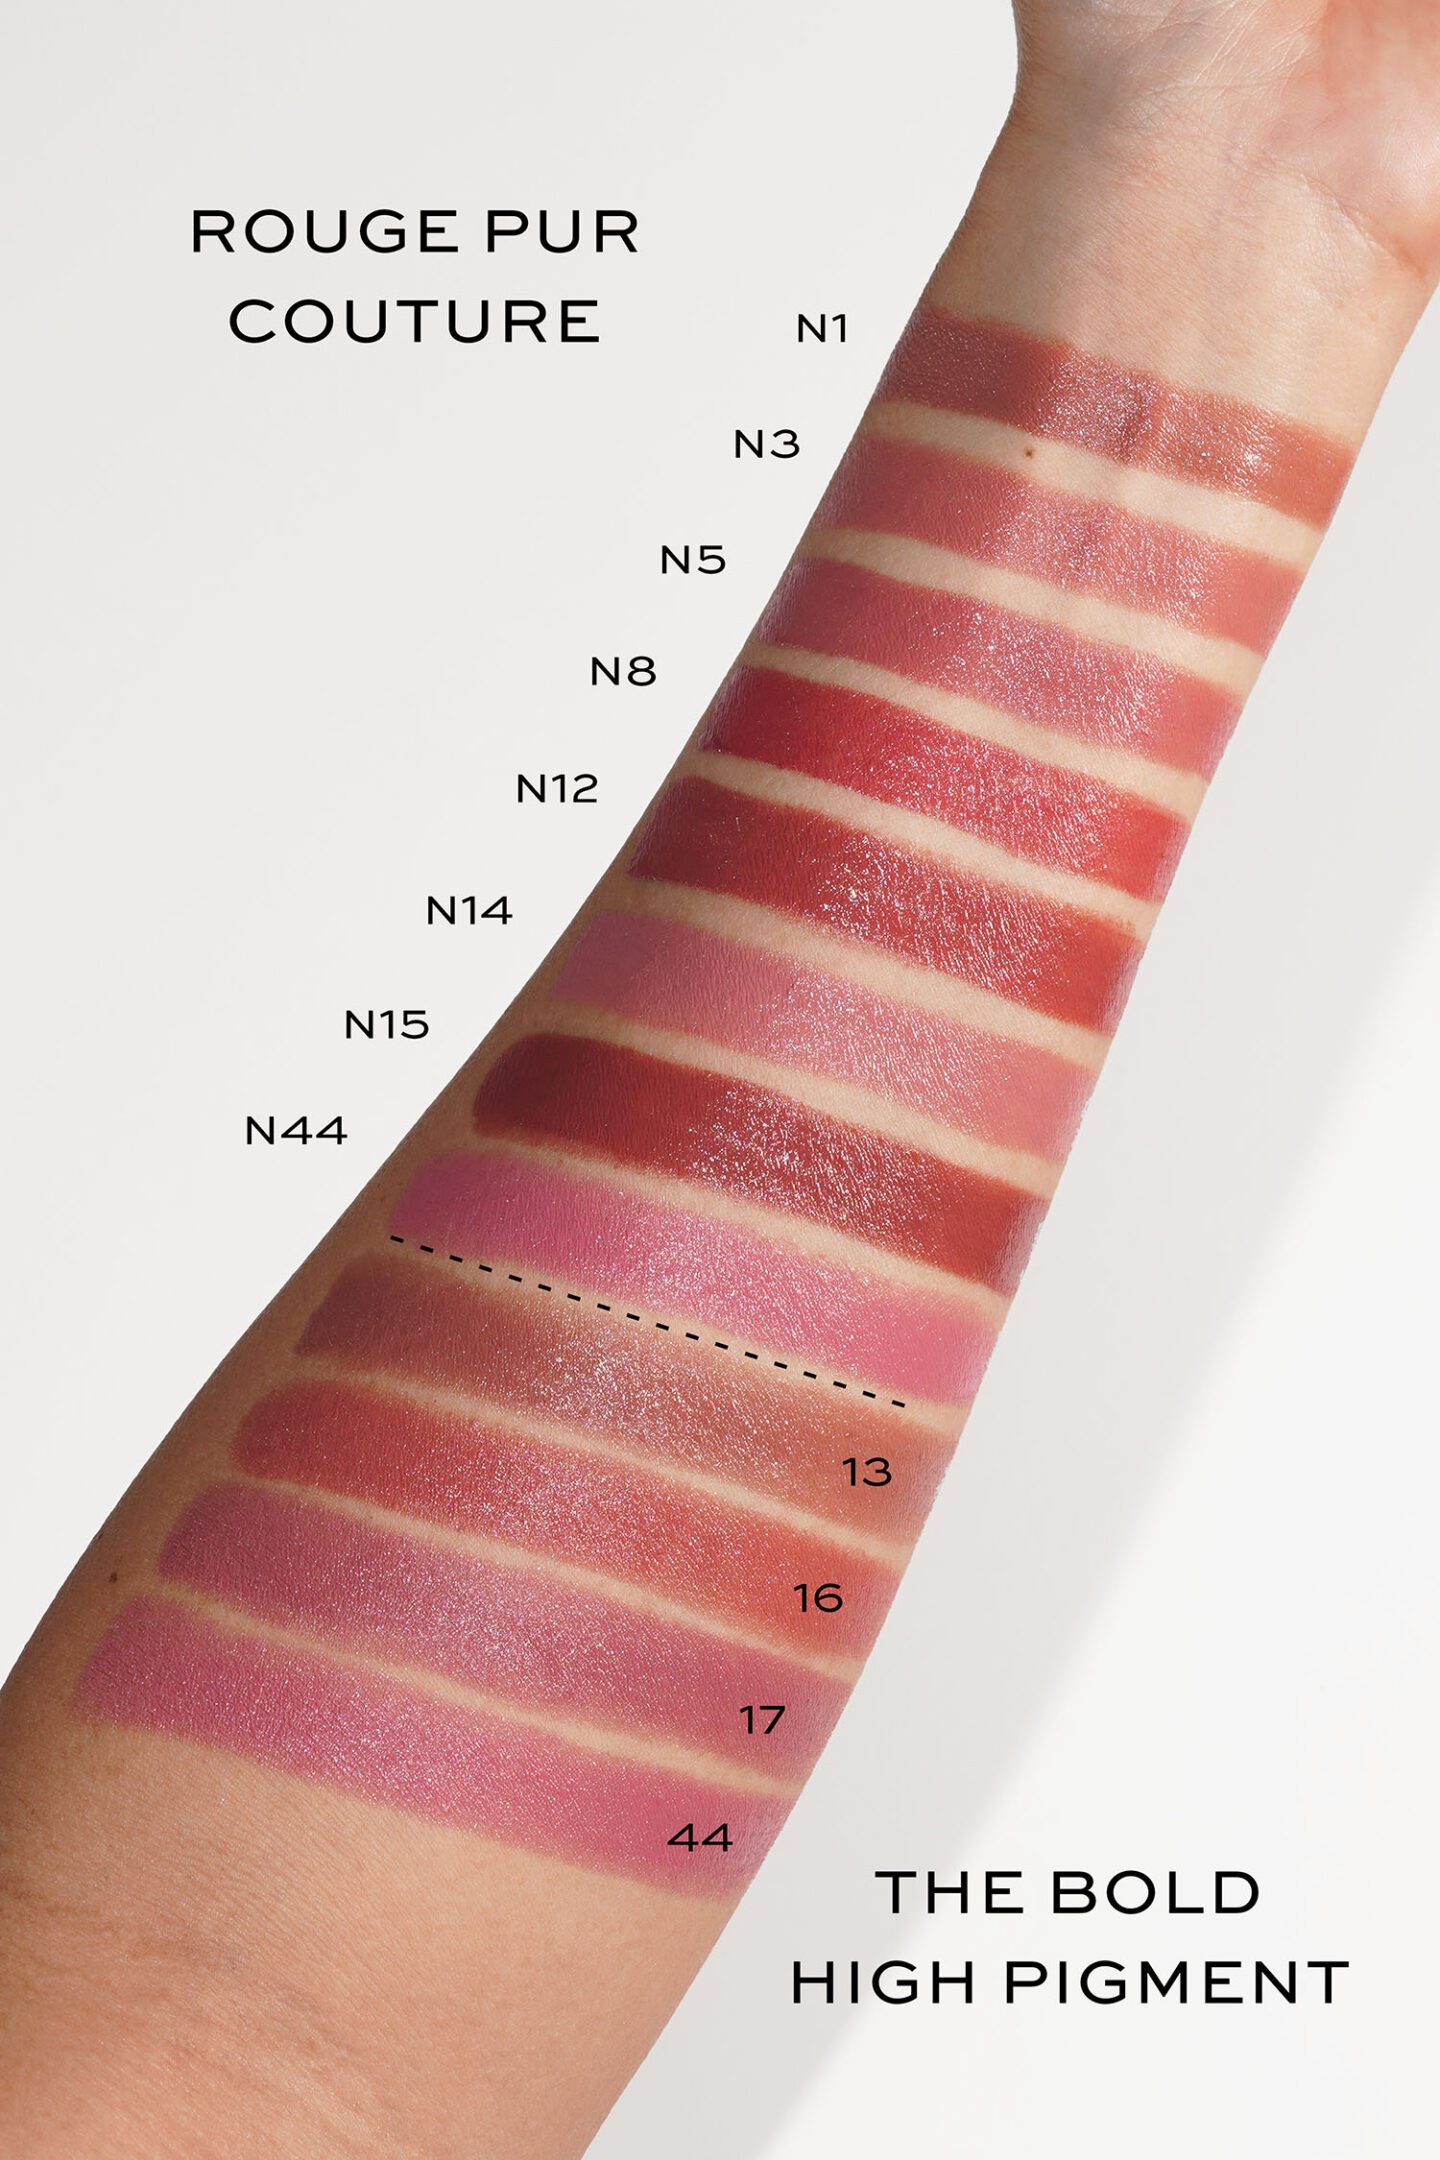 YSL Rouge Pur Couture and The Bold High Pigment new shades swatches